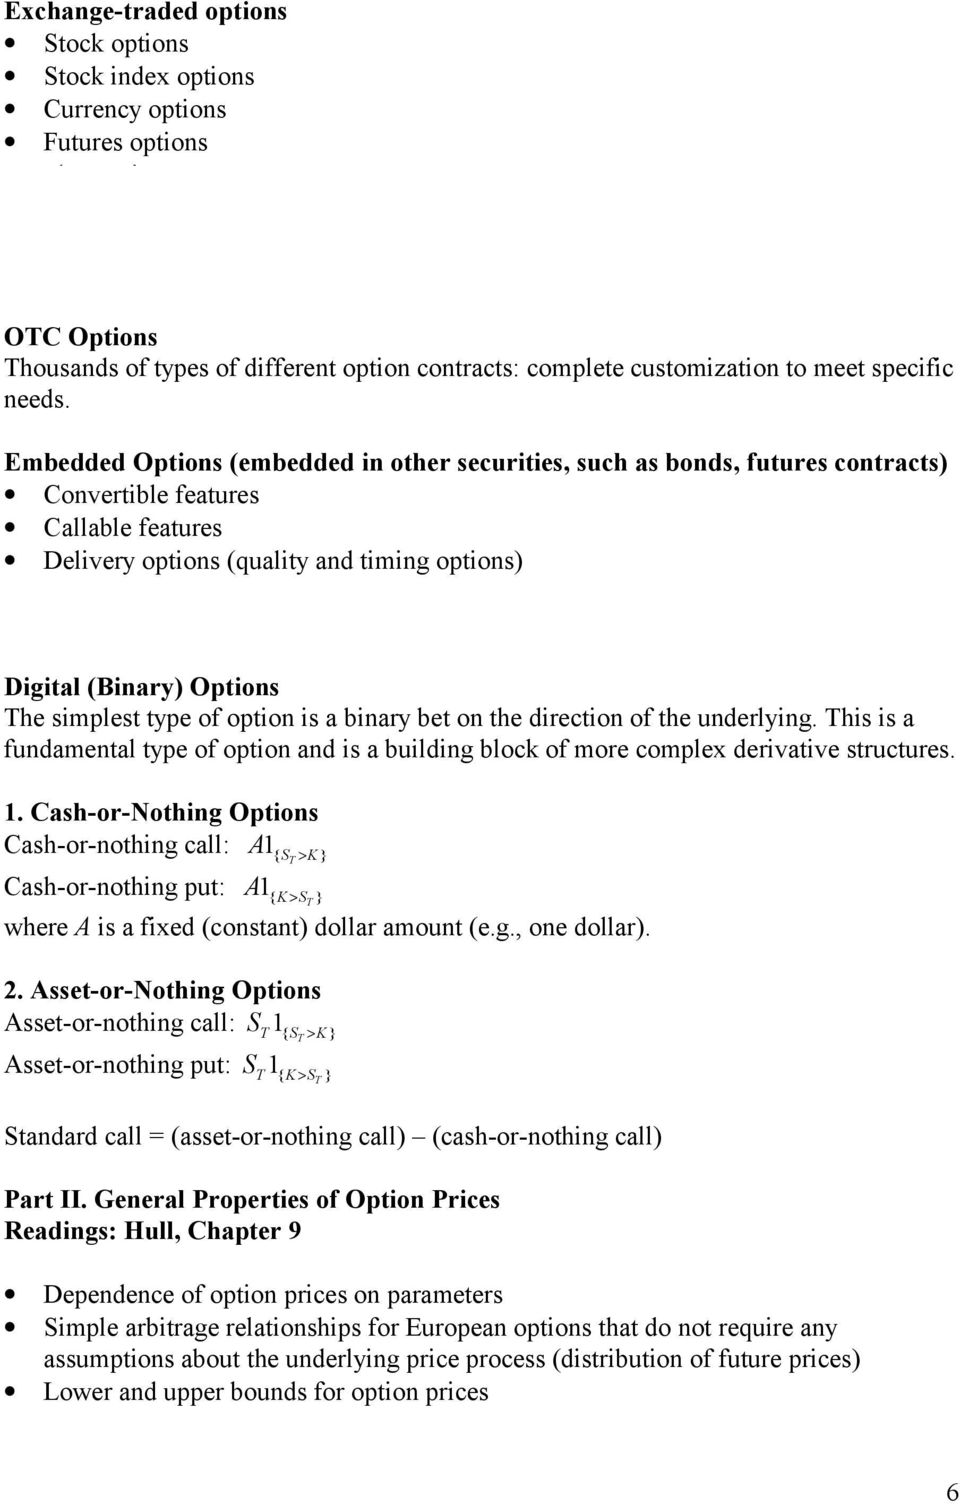 Embedded Options (embedded in other securities, such as bonds, futures contracts) Convertible features Callable features Delivery options (quality and timing options) Options Trading Mechanics: Read